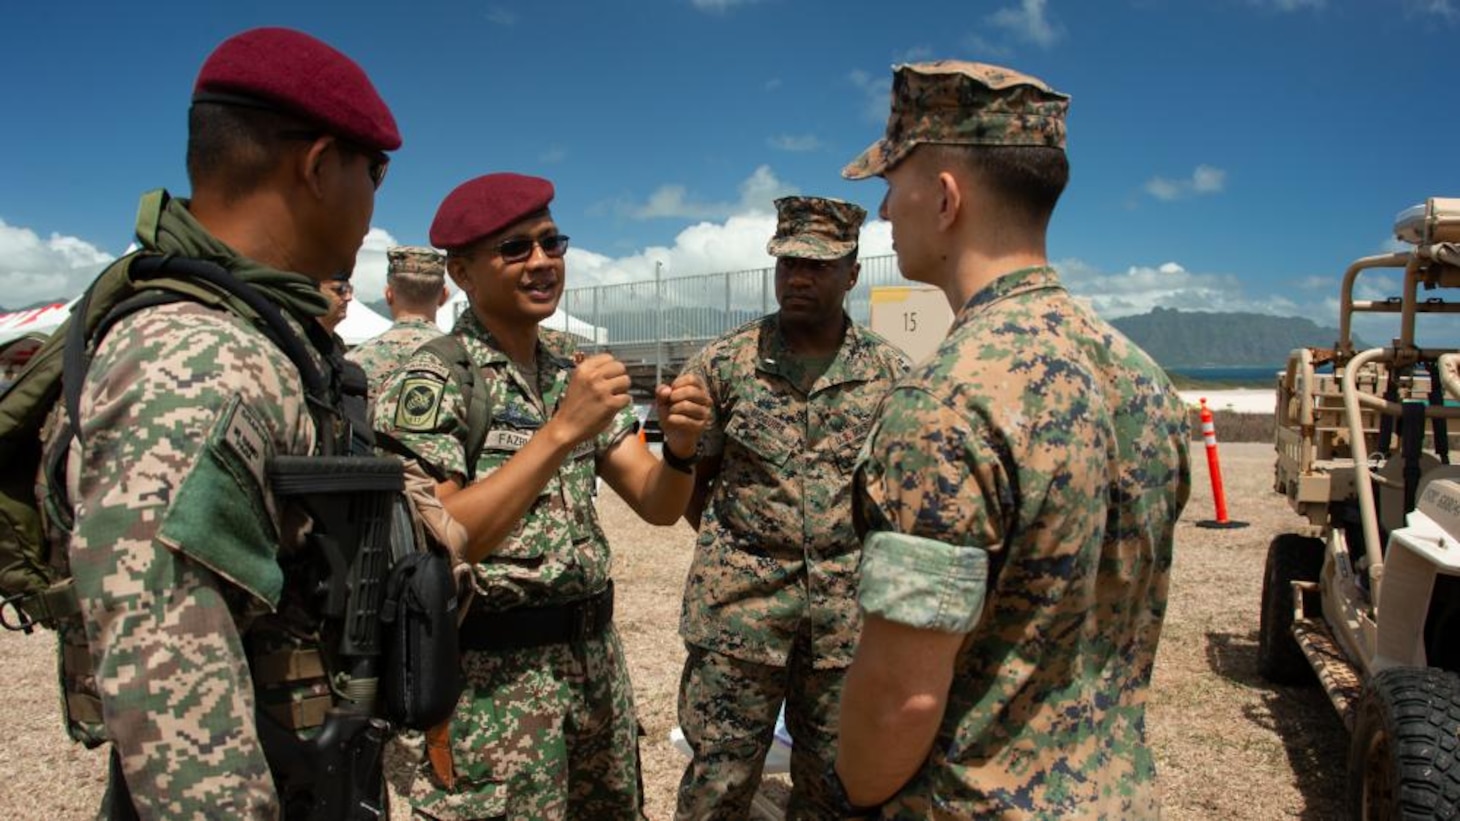 U.S. Marines with 3d Marine Littoral Regiment, 3d Marine Division, interact with Malaysian Army soldiers during Distinguished Visitor Day as part of the Rim of the Pacific (RIMPAC) 2022, August 1, 2022.